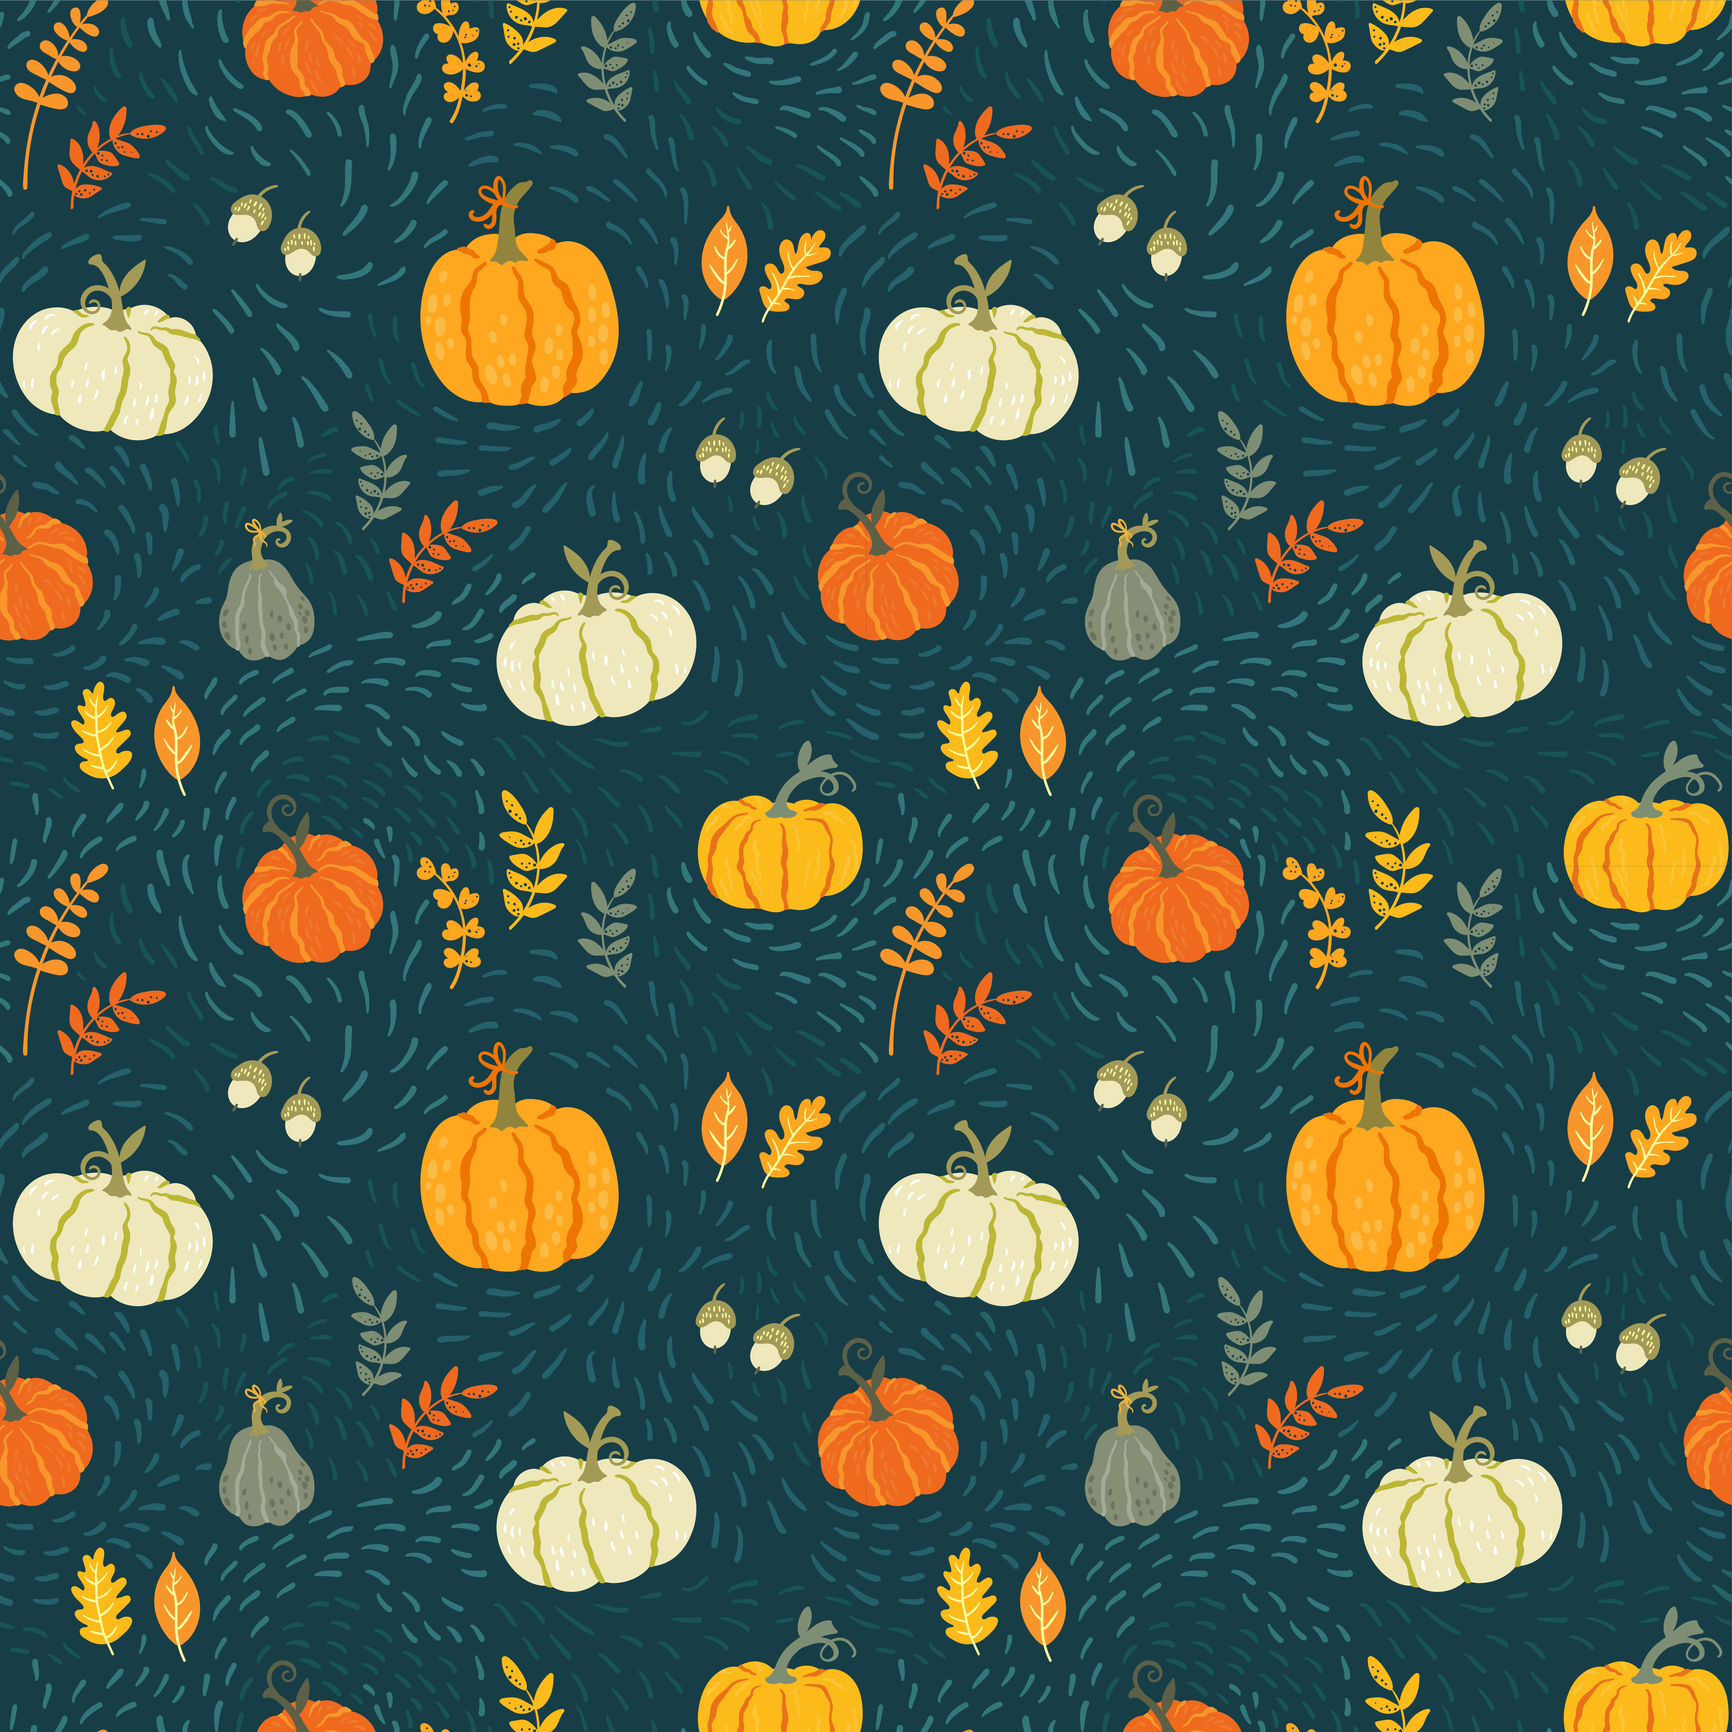 Cute hand drawn pumpkin seamless pattern, hand drawn pumpkins as Thanksgiving background, textiles, banners, wallpaper, wrapping design. Old Mill Toronto